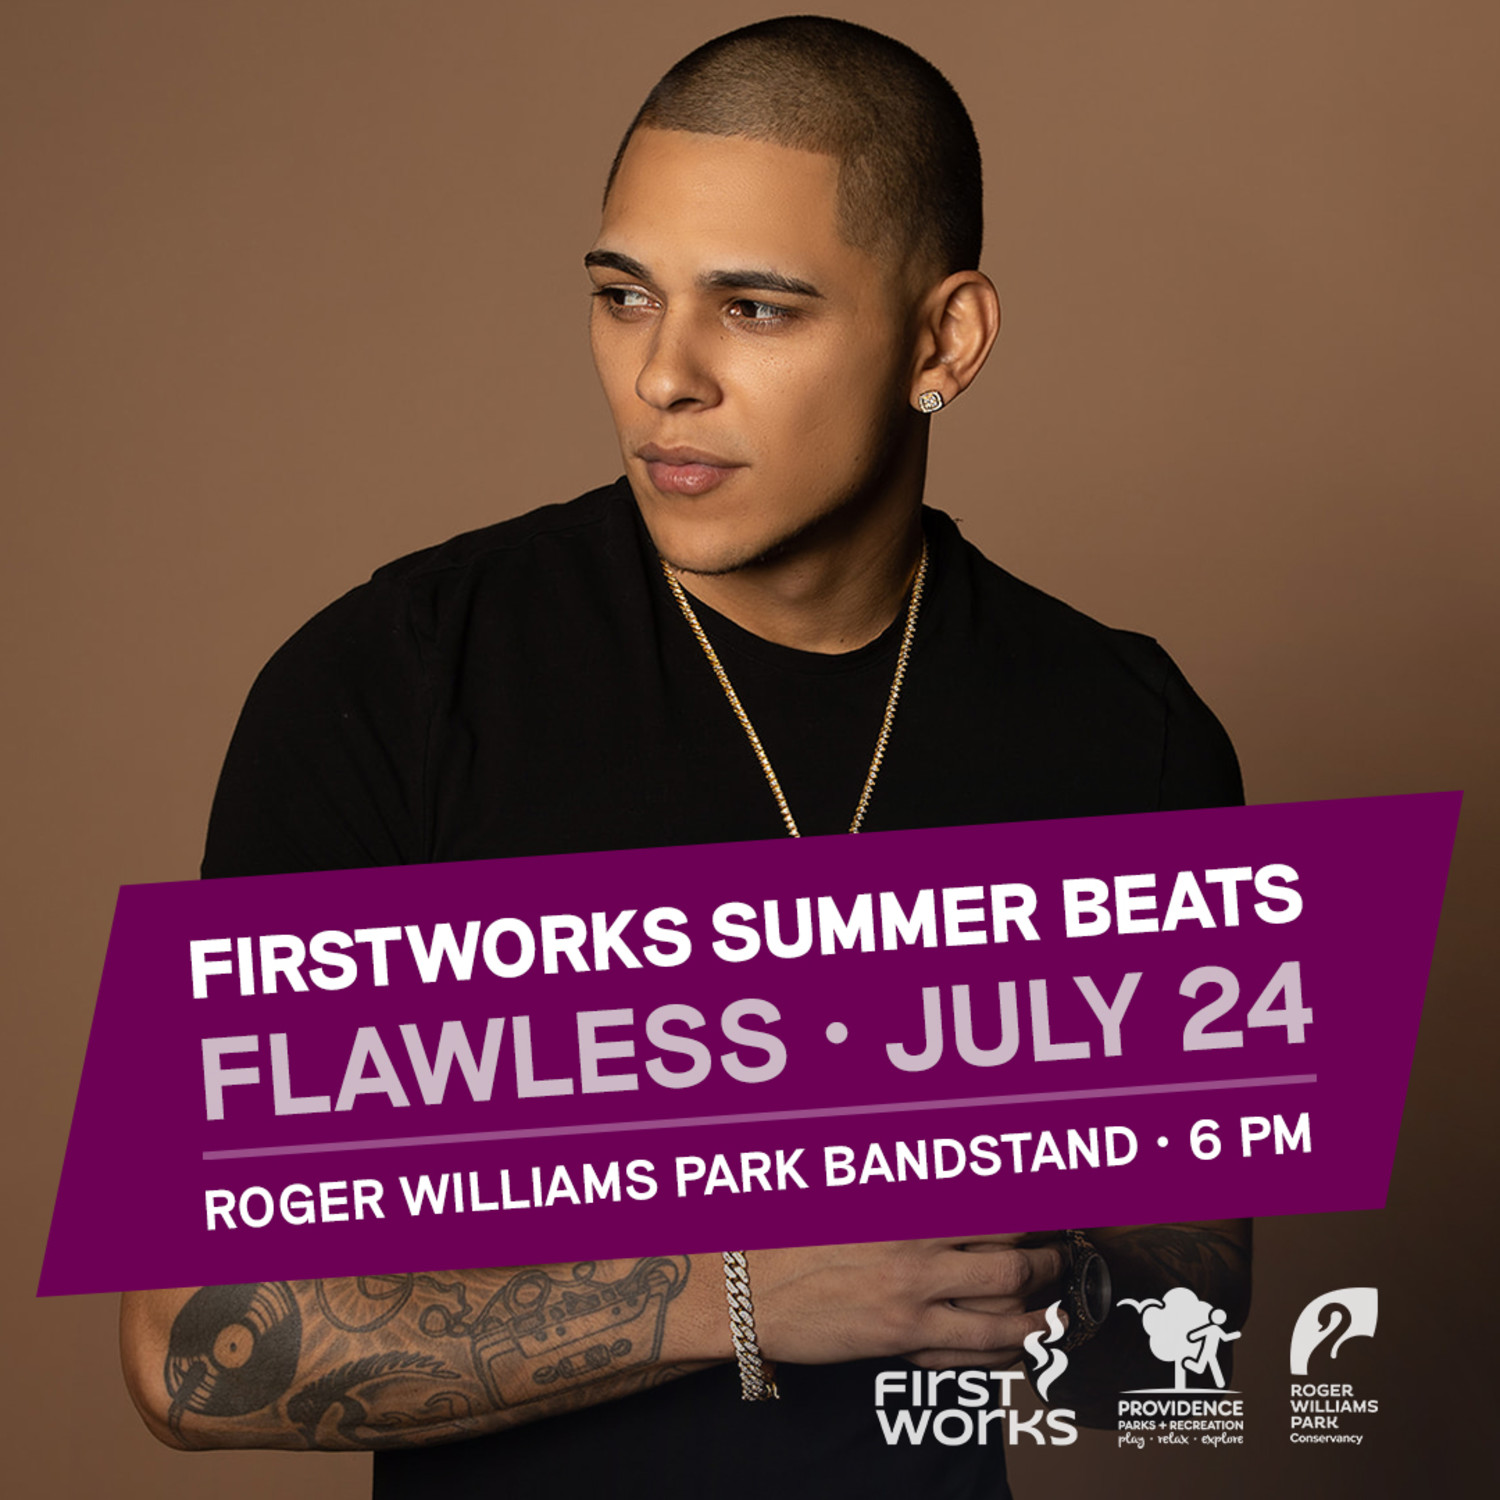 FirstWorks Summer Beats Concert Series — Flawless Providence Media